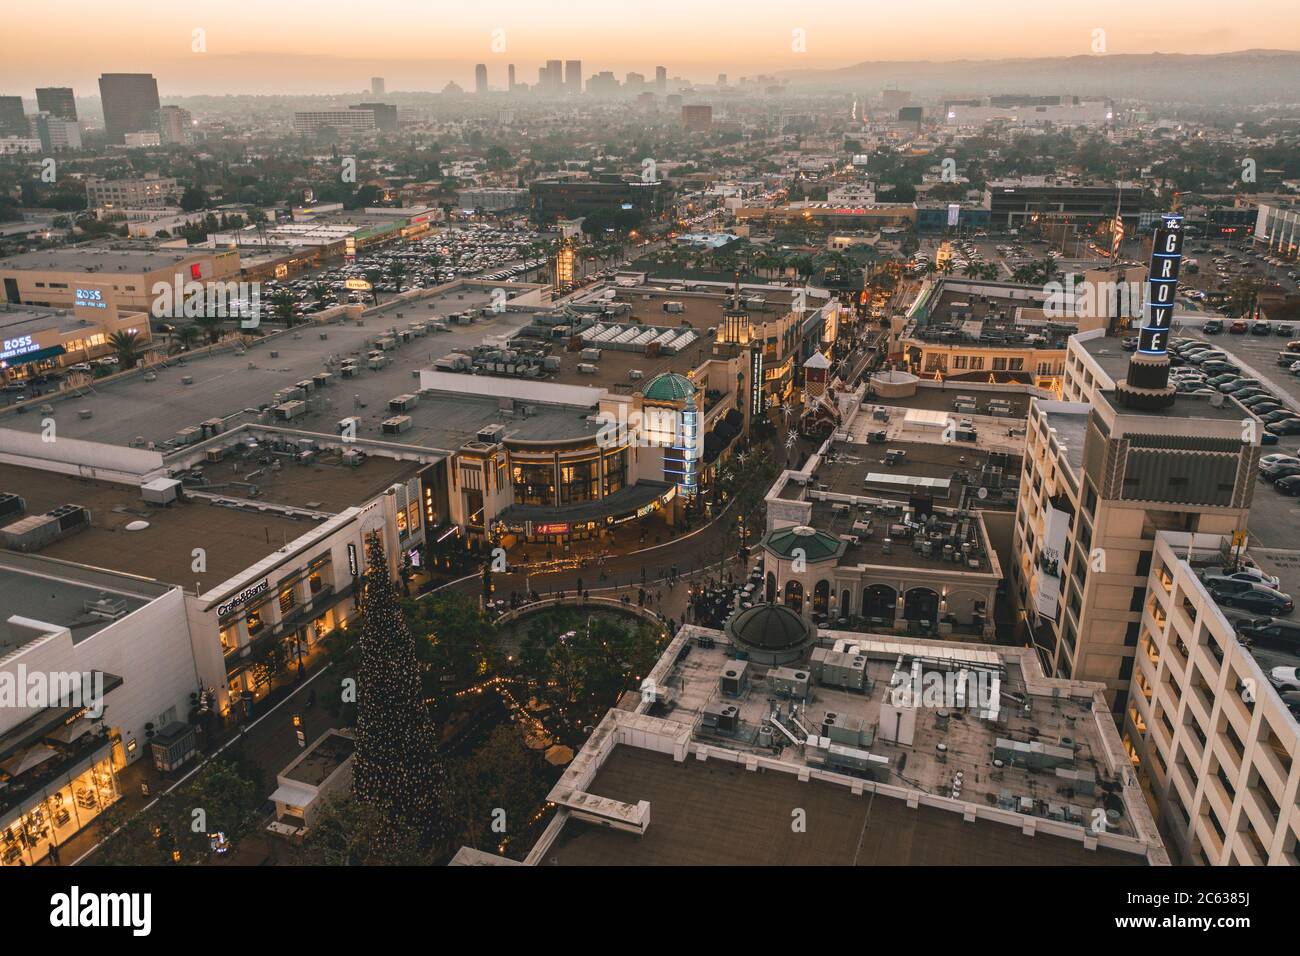 The Grove Shopping Center in Los Angeles at Sunset with Shops and Hollywood Skyline in the distance HQ Stock Photo